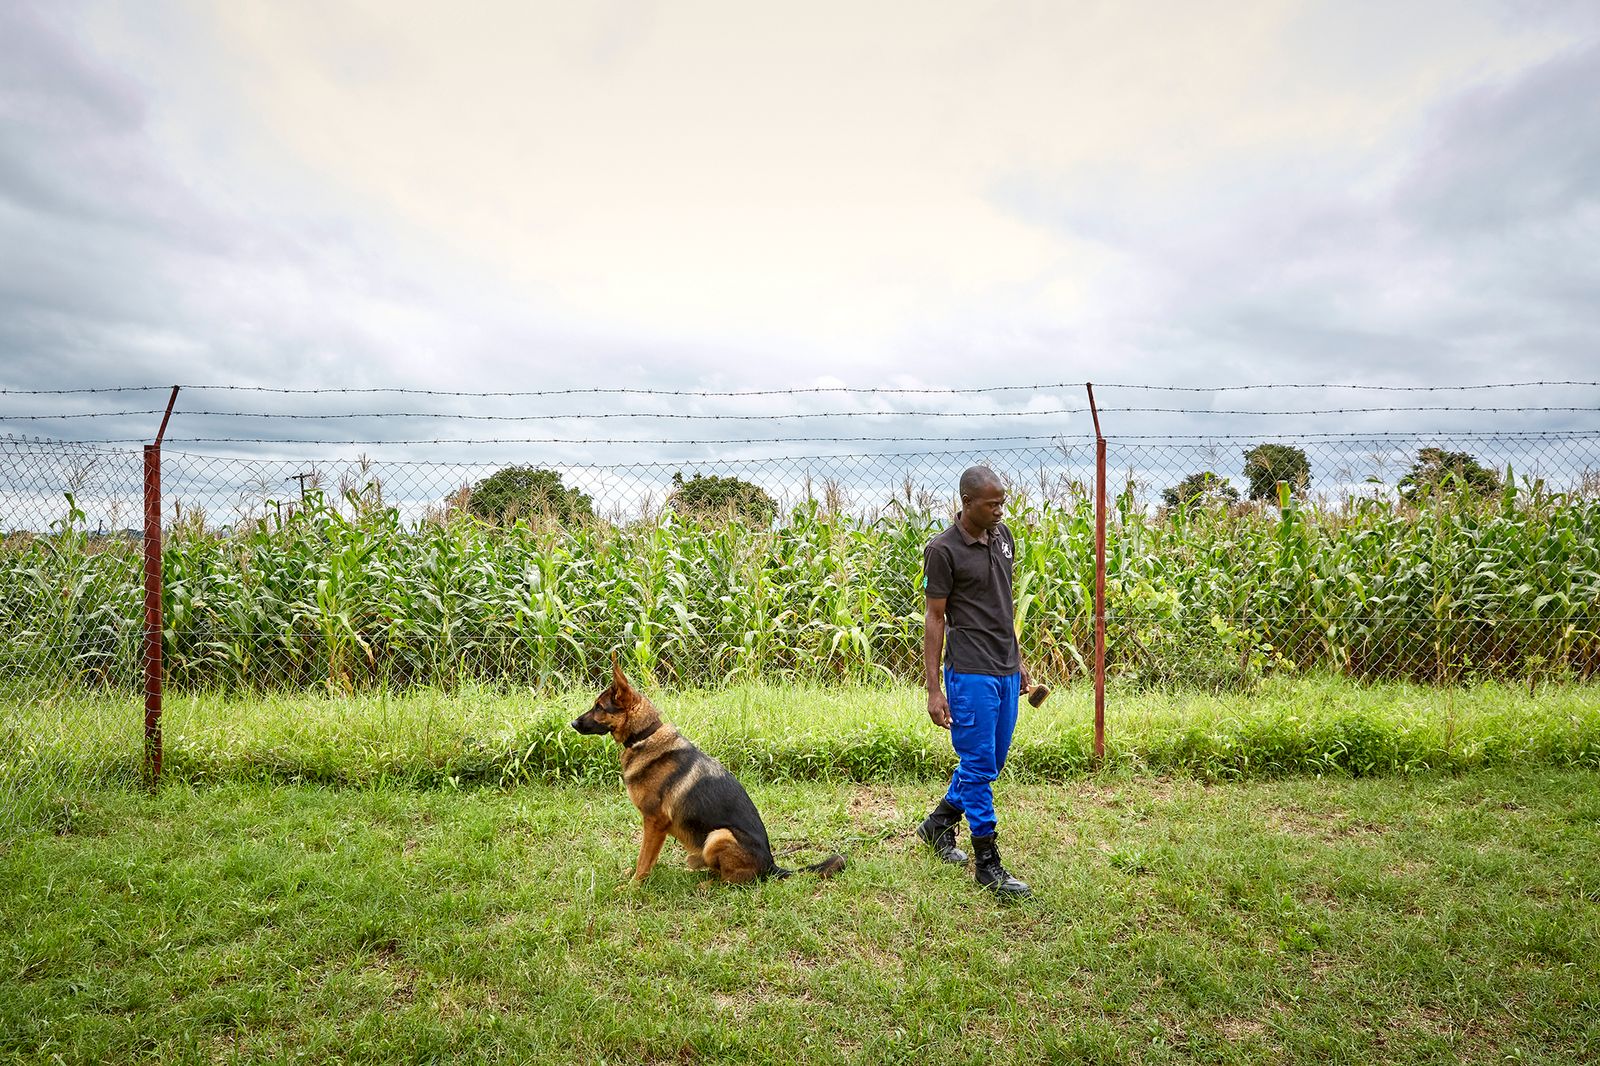 © Julia Gunther - Image from the Sniffing Out Wildlife Crime With Malawi's First Detection Dog Unit photography project